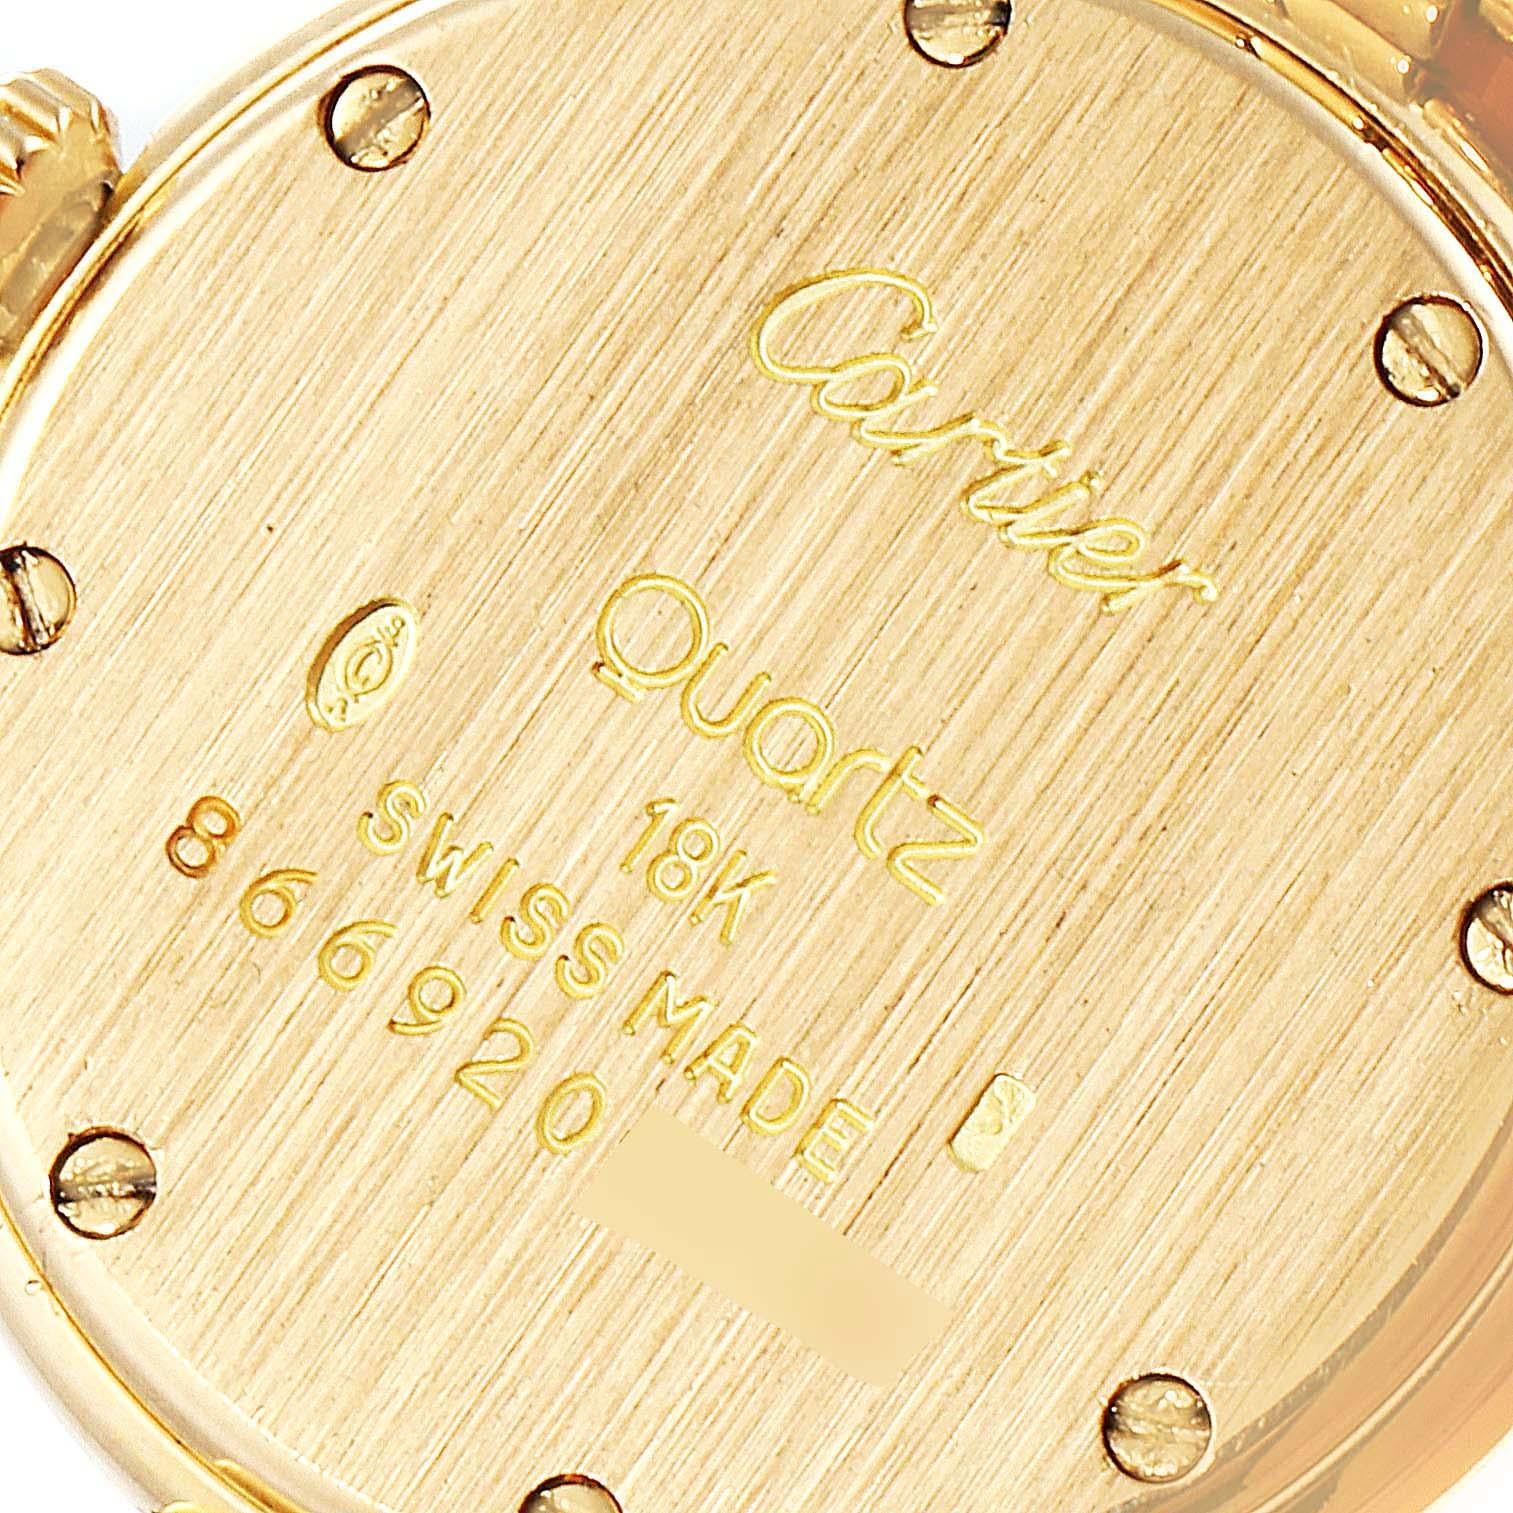 Cartier Panthere Vendome 18K Yellow Gold Ladies Watch 6692 1